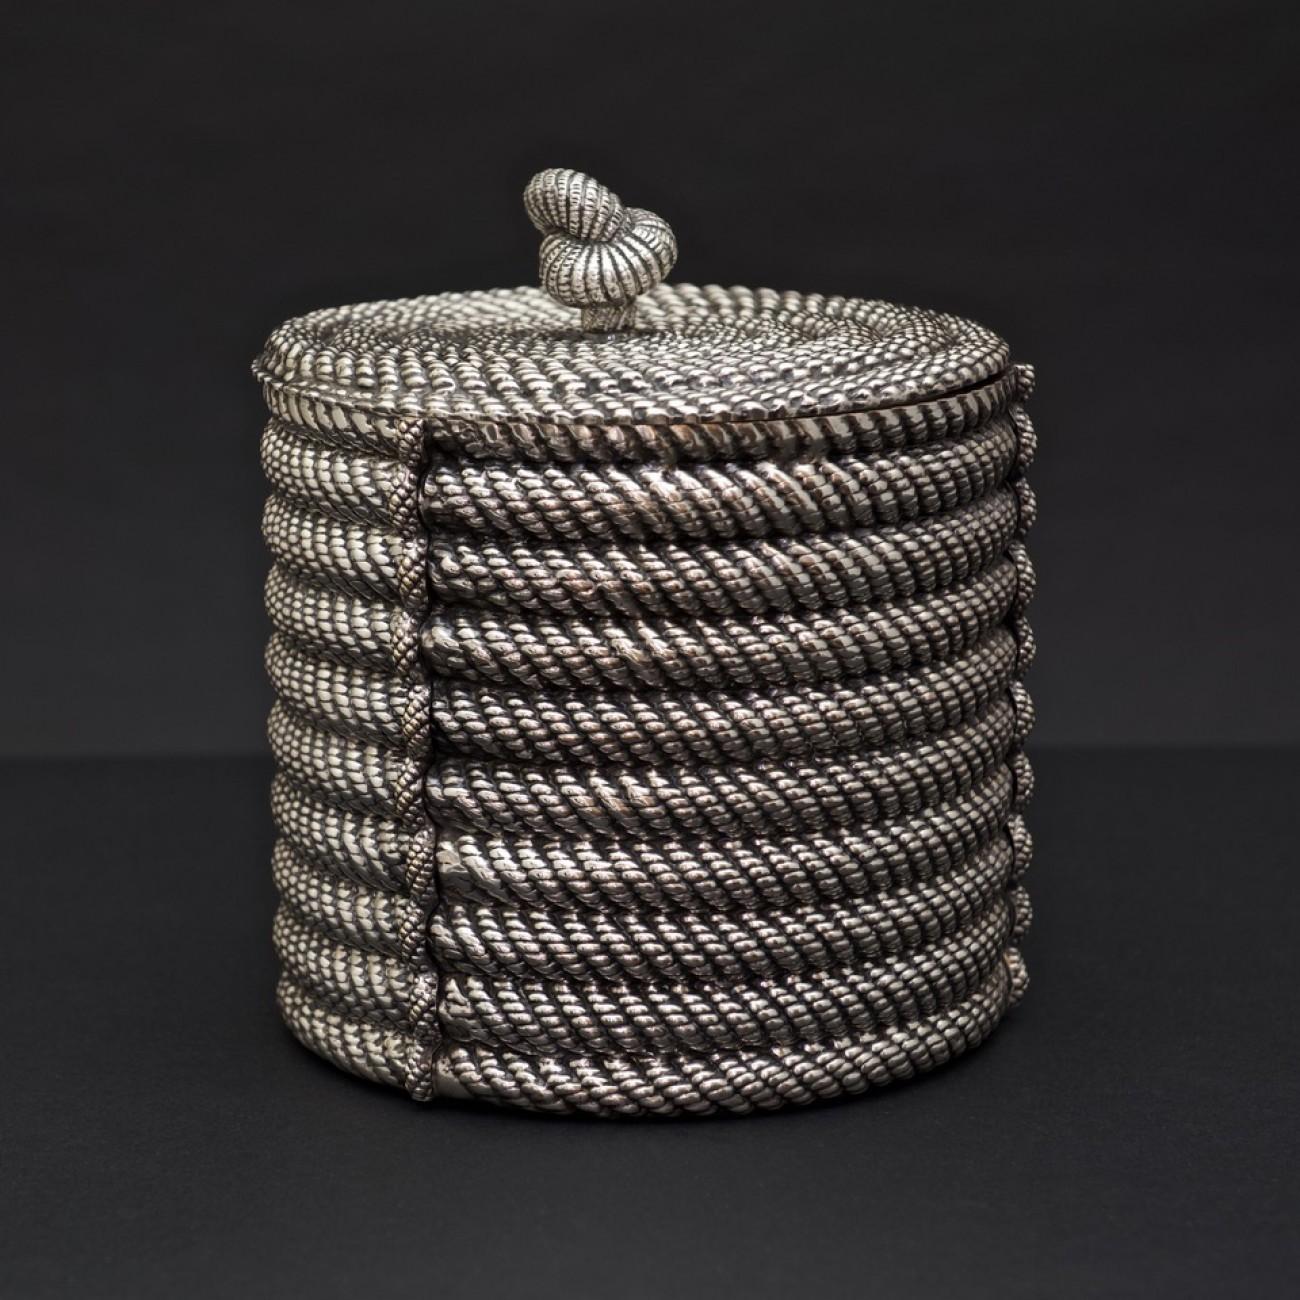 A stylish silver plated ice bucket or wine cooler of cylindrical design in the form of coiled rope with matching lid, by Spanish maker Valenti; circa 1975. The inside liner is insulated to help keep things cool.

Dimensions: 22cm/8¼ inches (height)